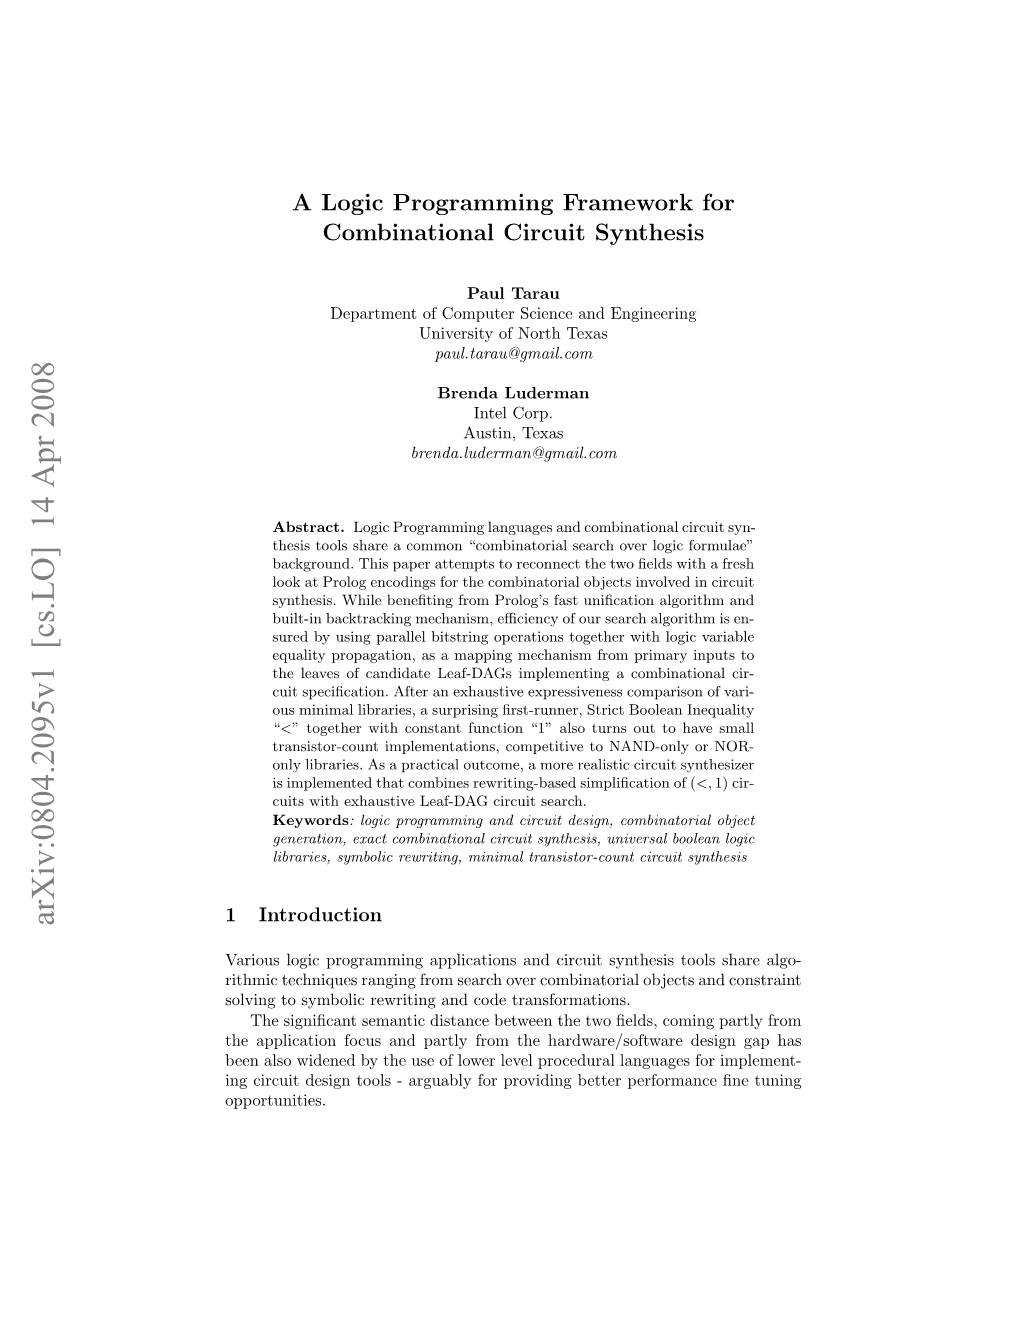 A Logic Programming Framework for Combinational Circuit Synthesis